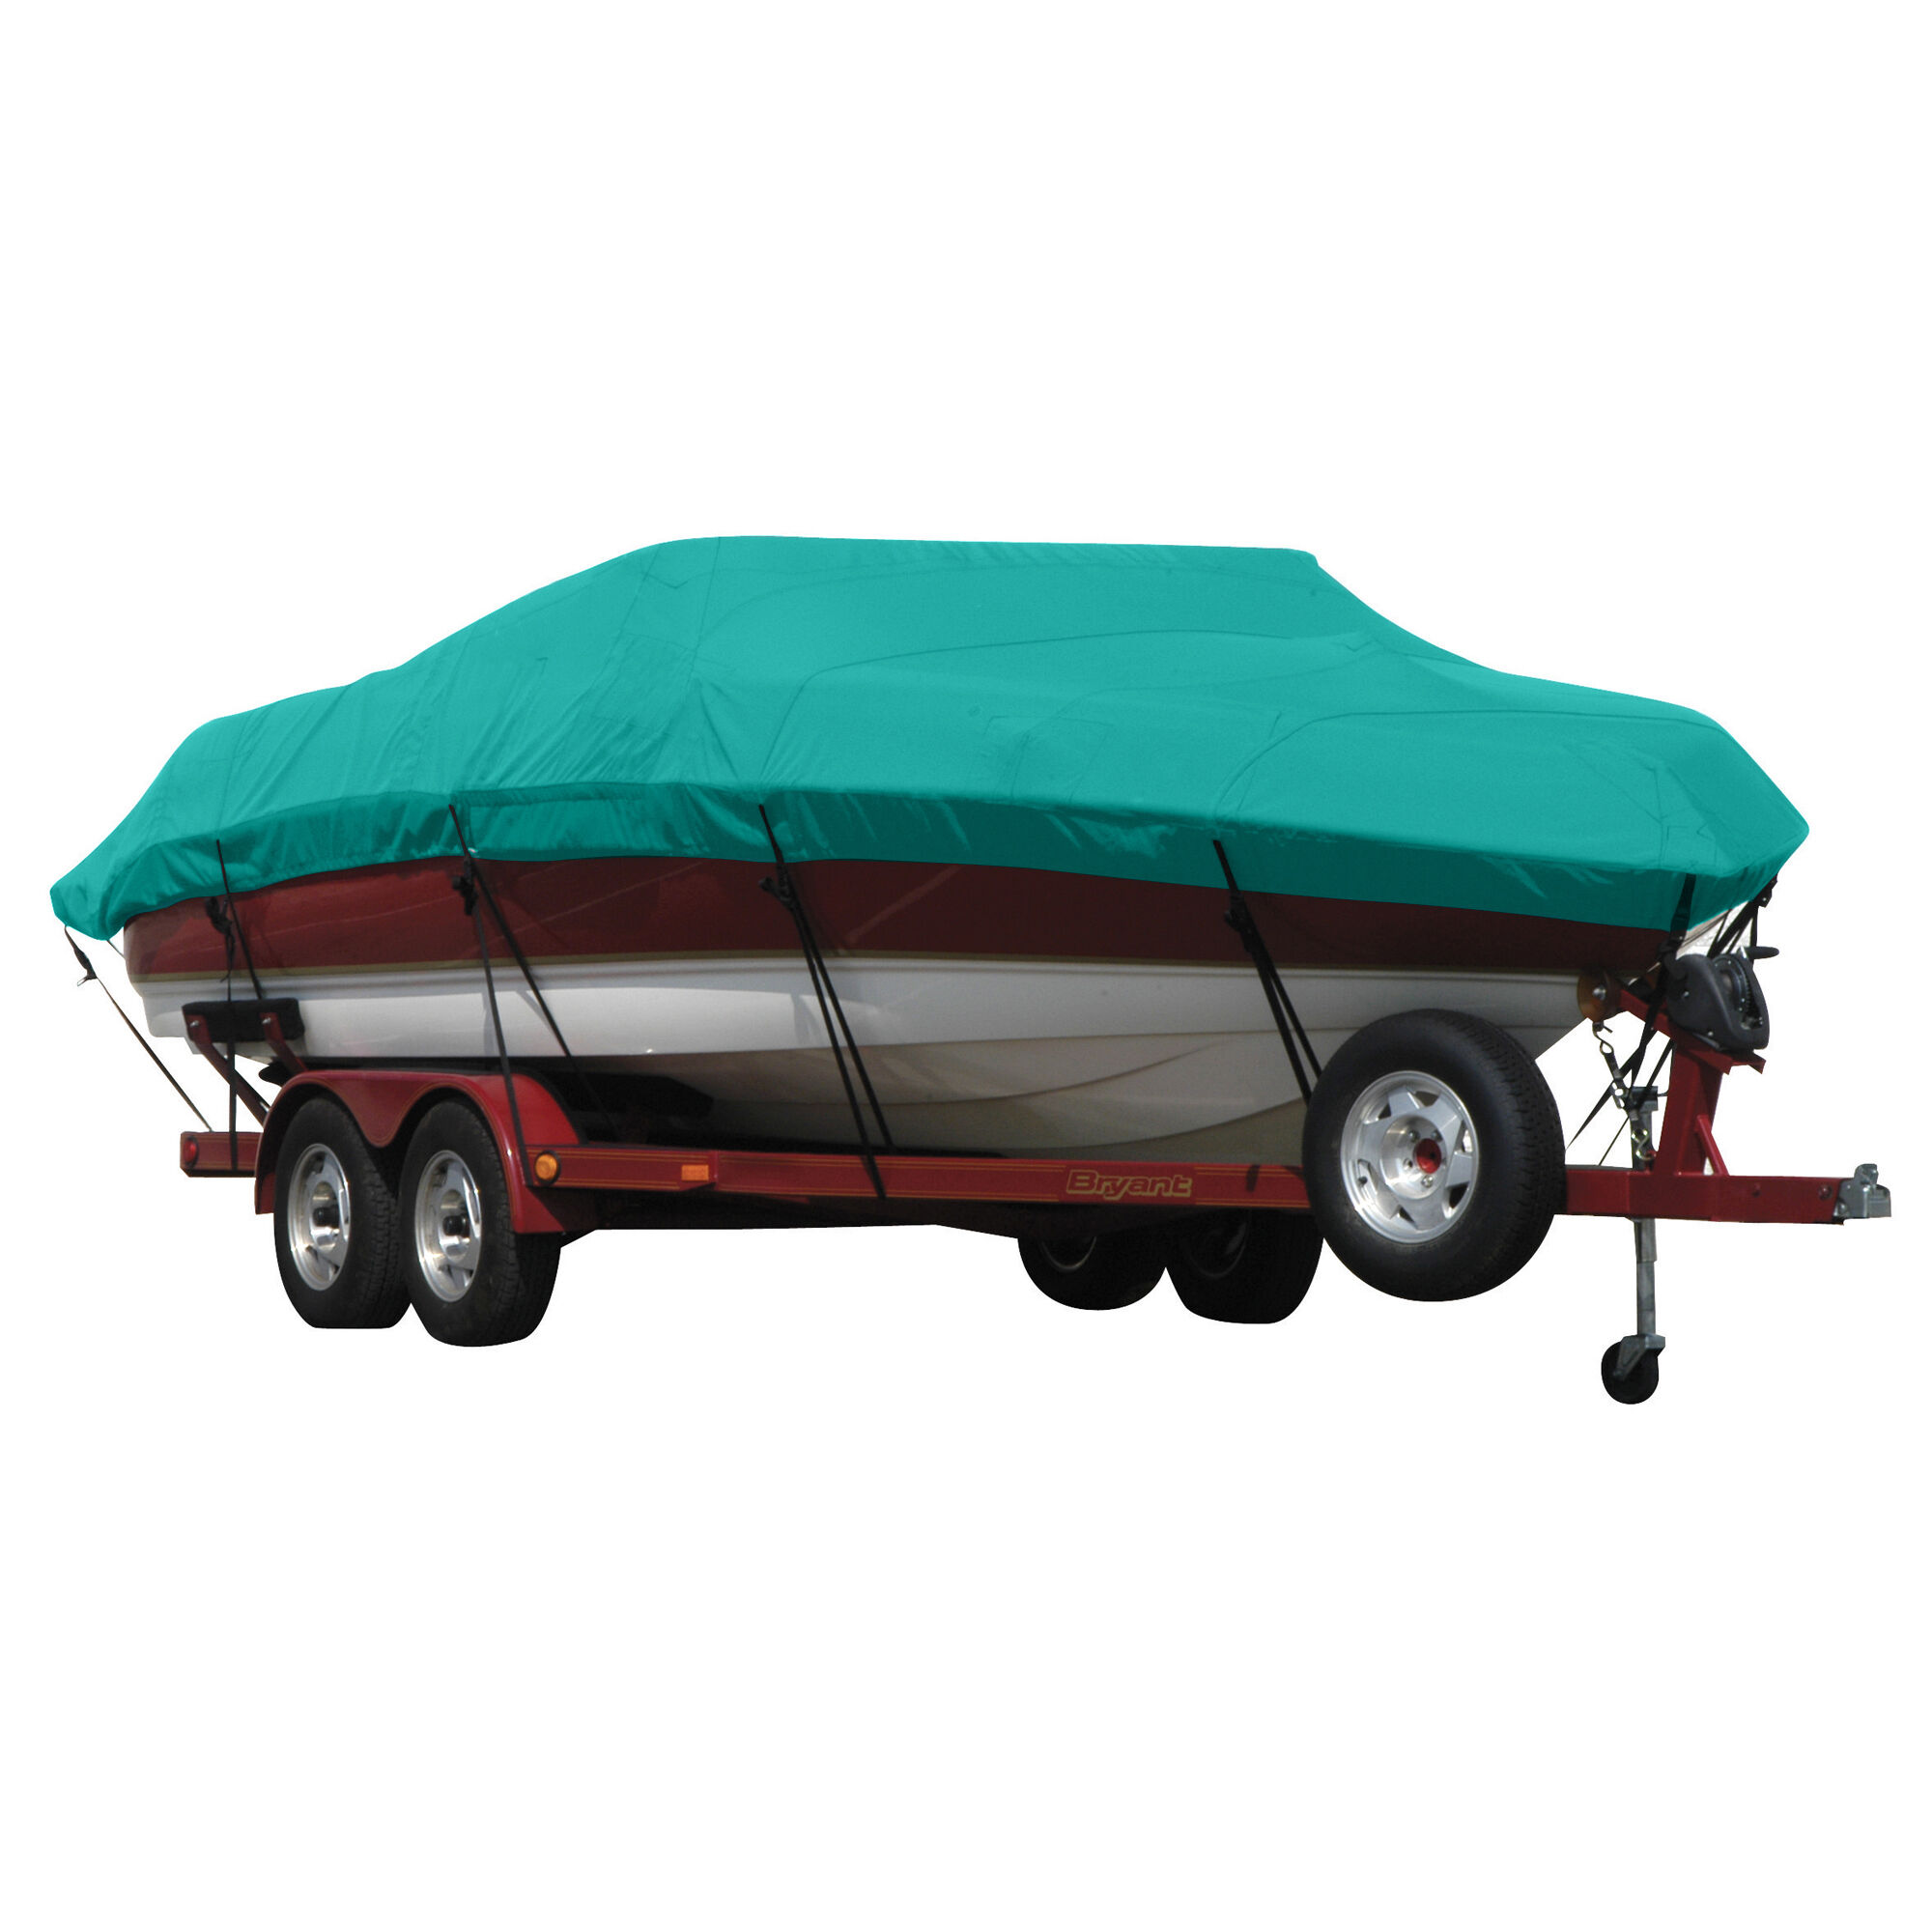 Covermate Exact Fit Sunbrella Boat Cover for Tige 2000 Slm Comp 2000 Slm Comp Does Not Cover Swim PLATFORMm. Persian Green